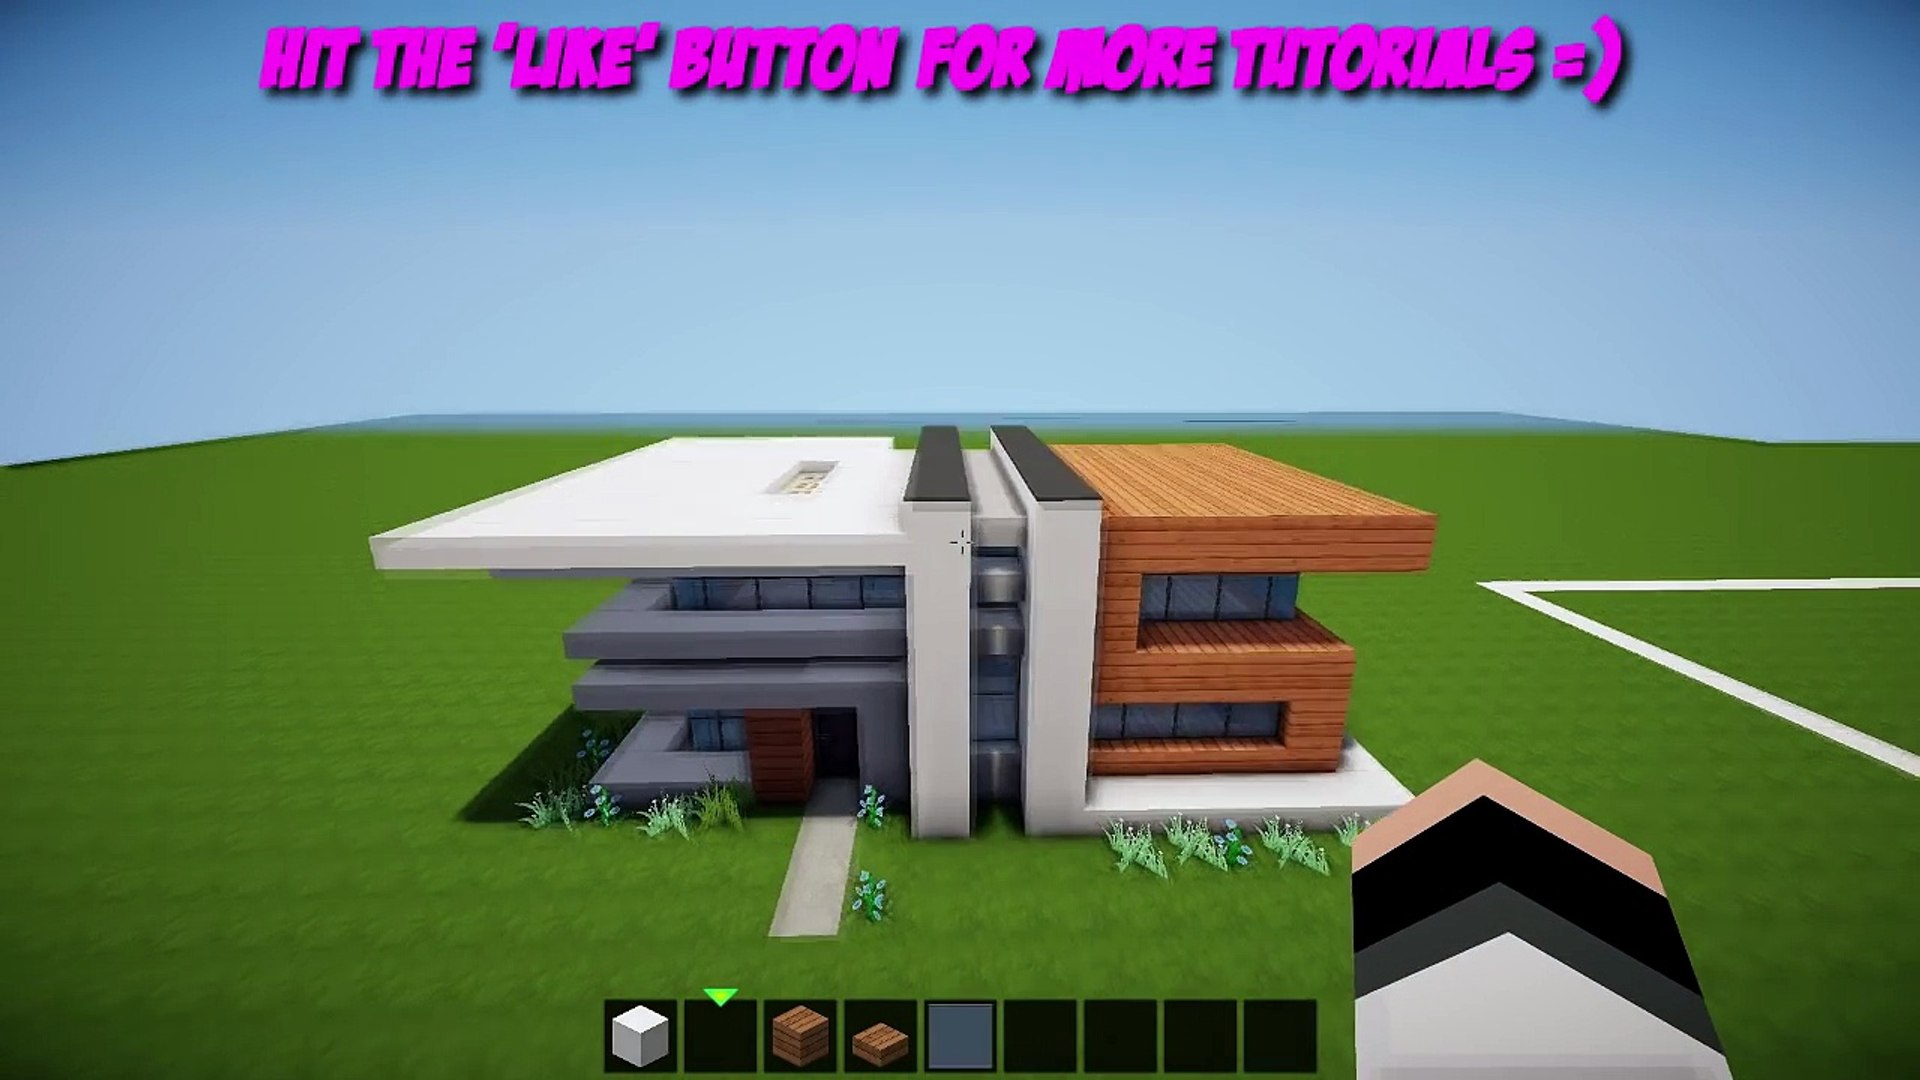 Minecraft Small Easy Modern House Tutorial How To Build A House Video Dailymotion Want to live like spongebob? minecraft small easy modern house tutorial how to build a house